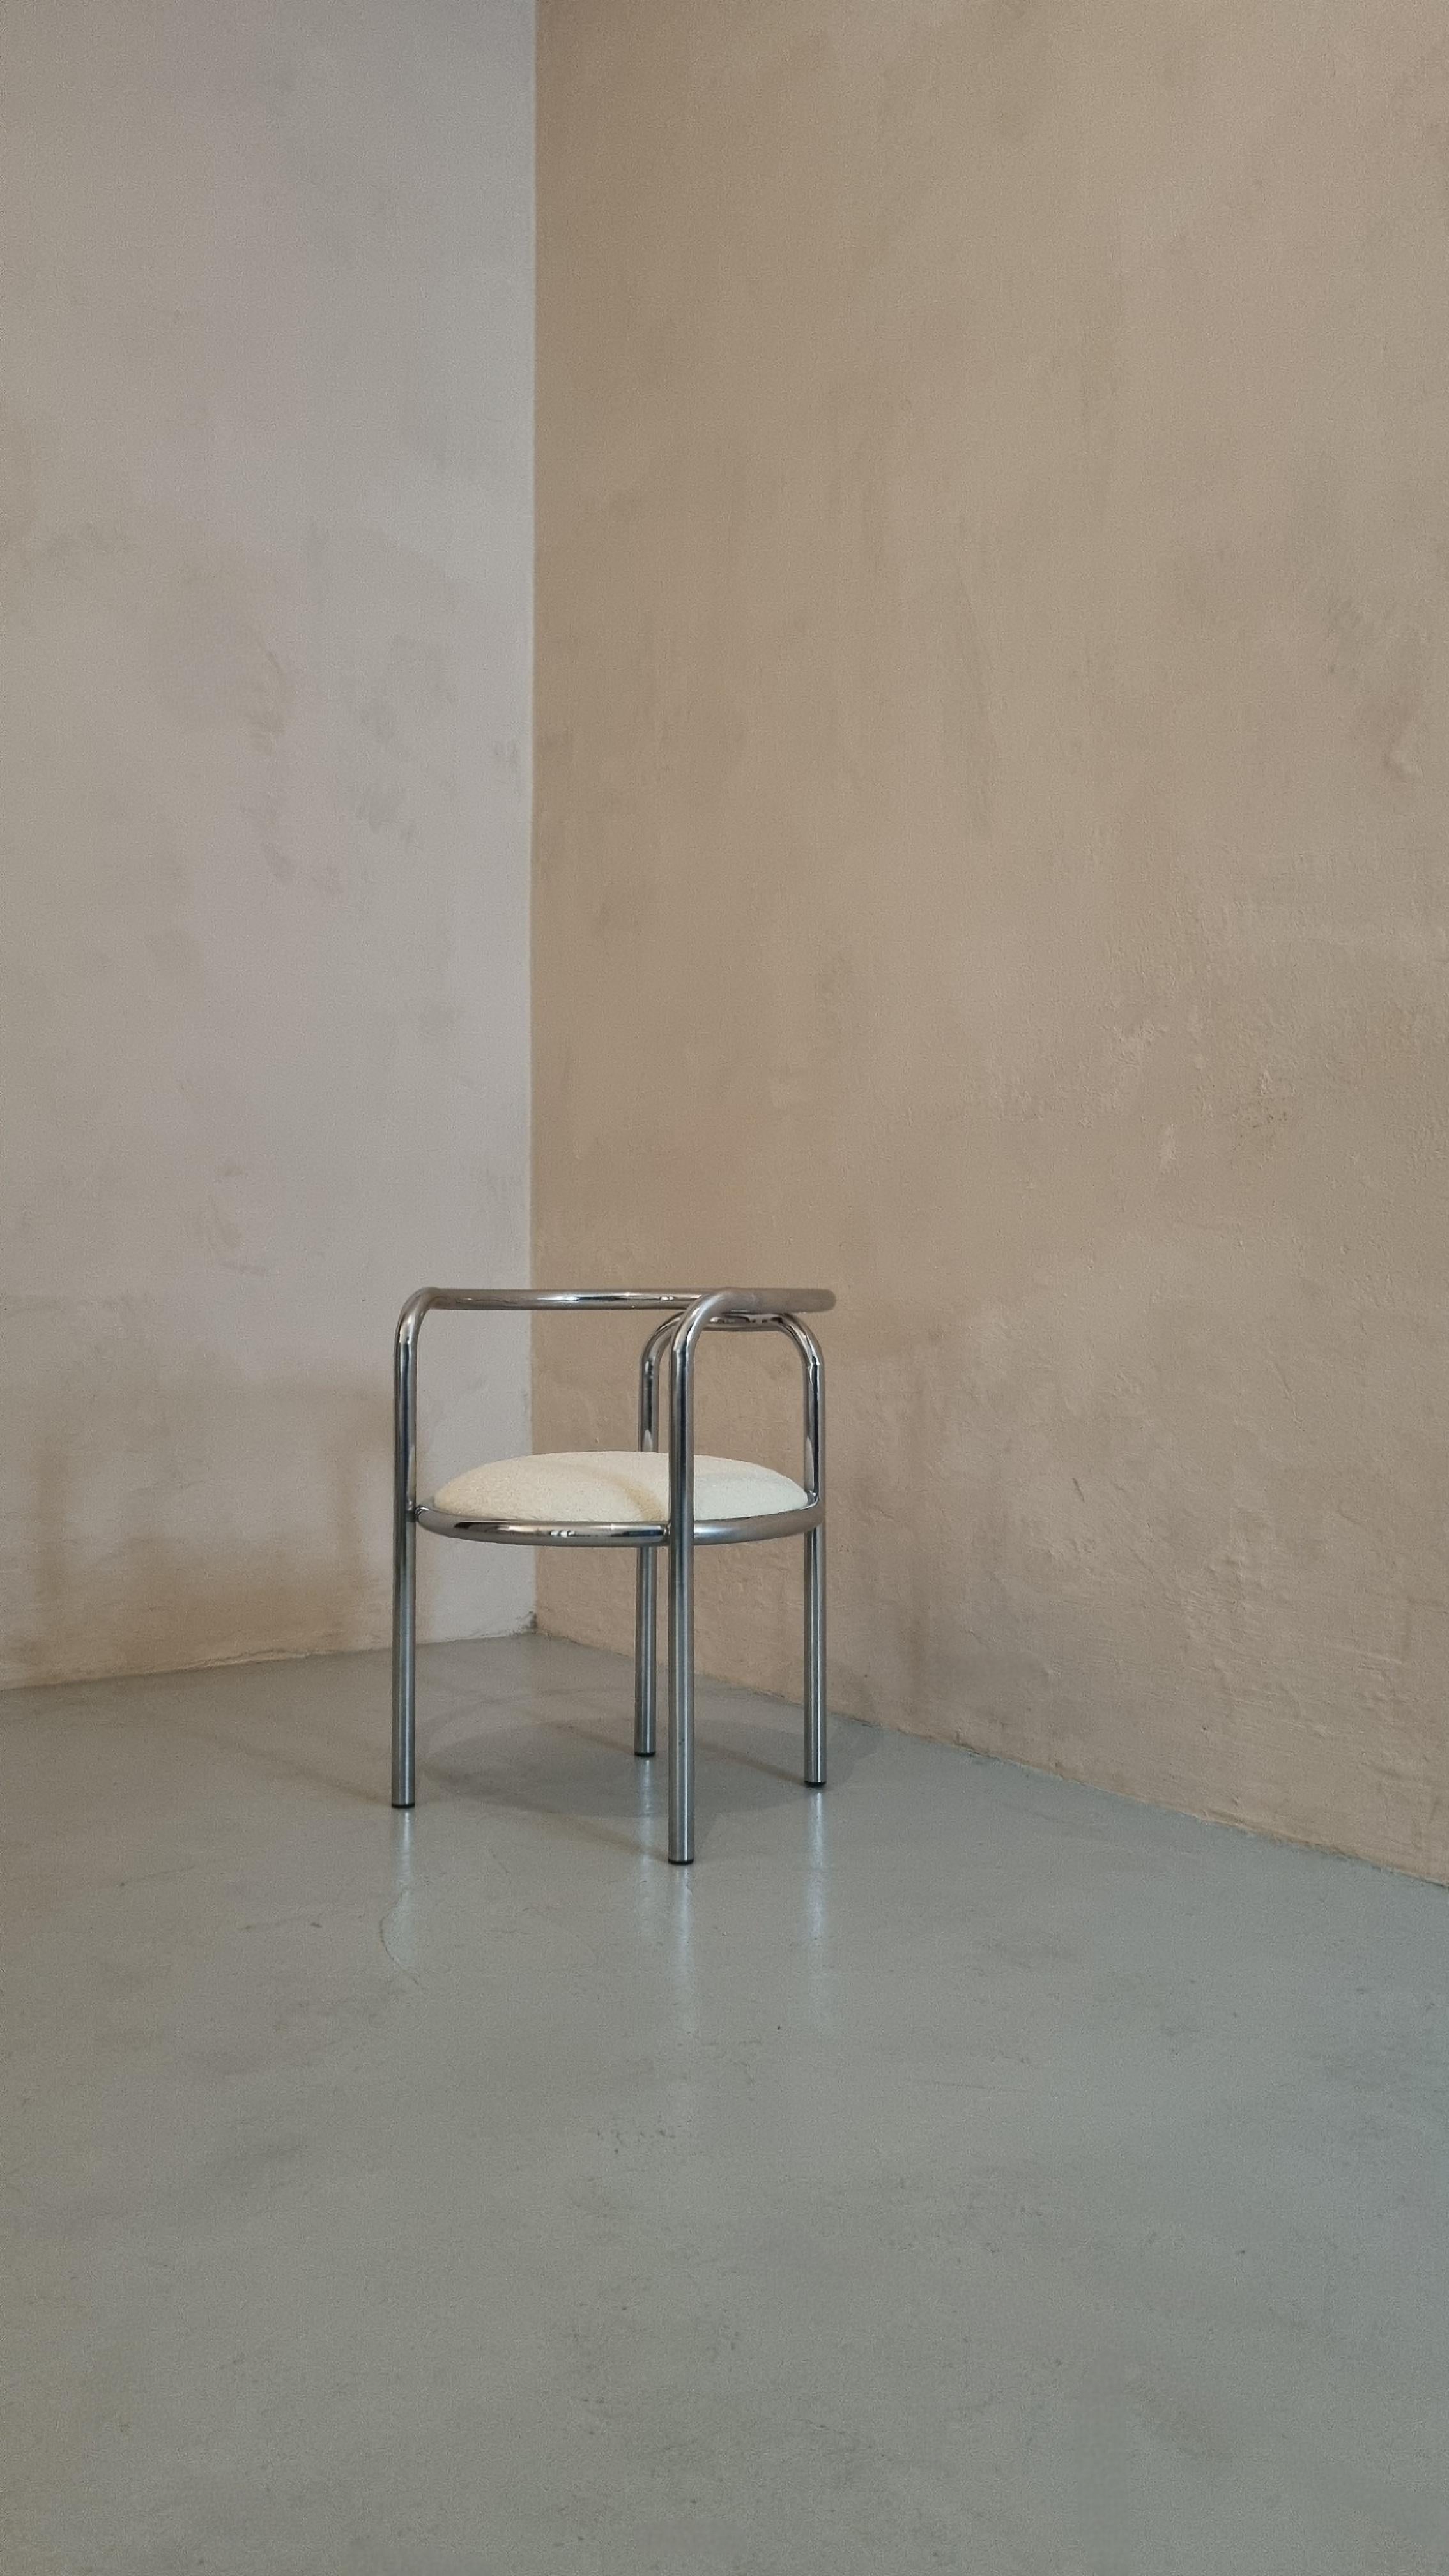 Locus Solus chair designed by Gae Aulenti for Poltronova 1964.
An early production in good condition, restored bouclé seat.
Chrome metal frame, cotton.
The chair has slight defects, in places the chrome plating has blown off.
Trademark of the